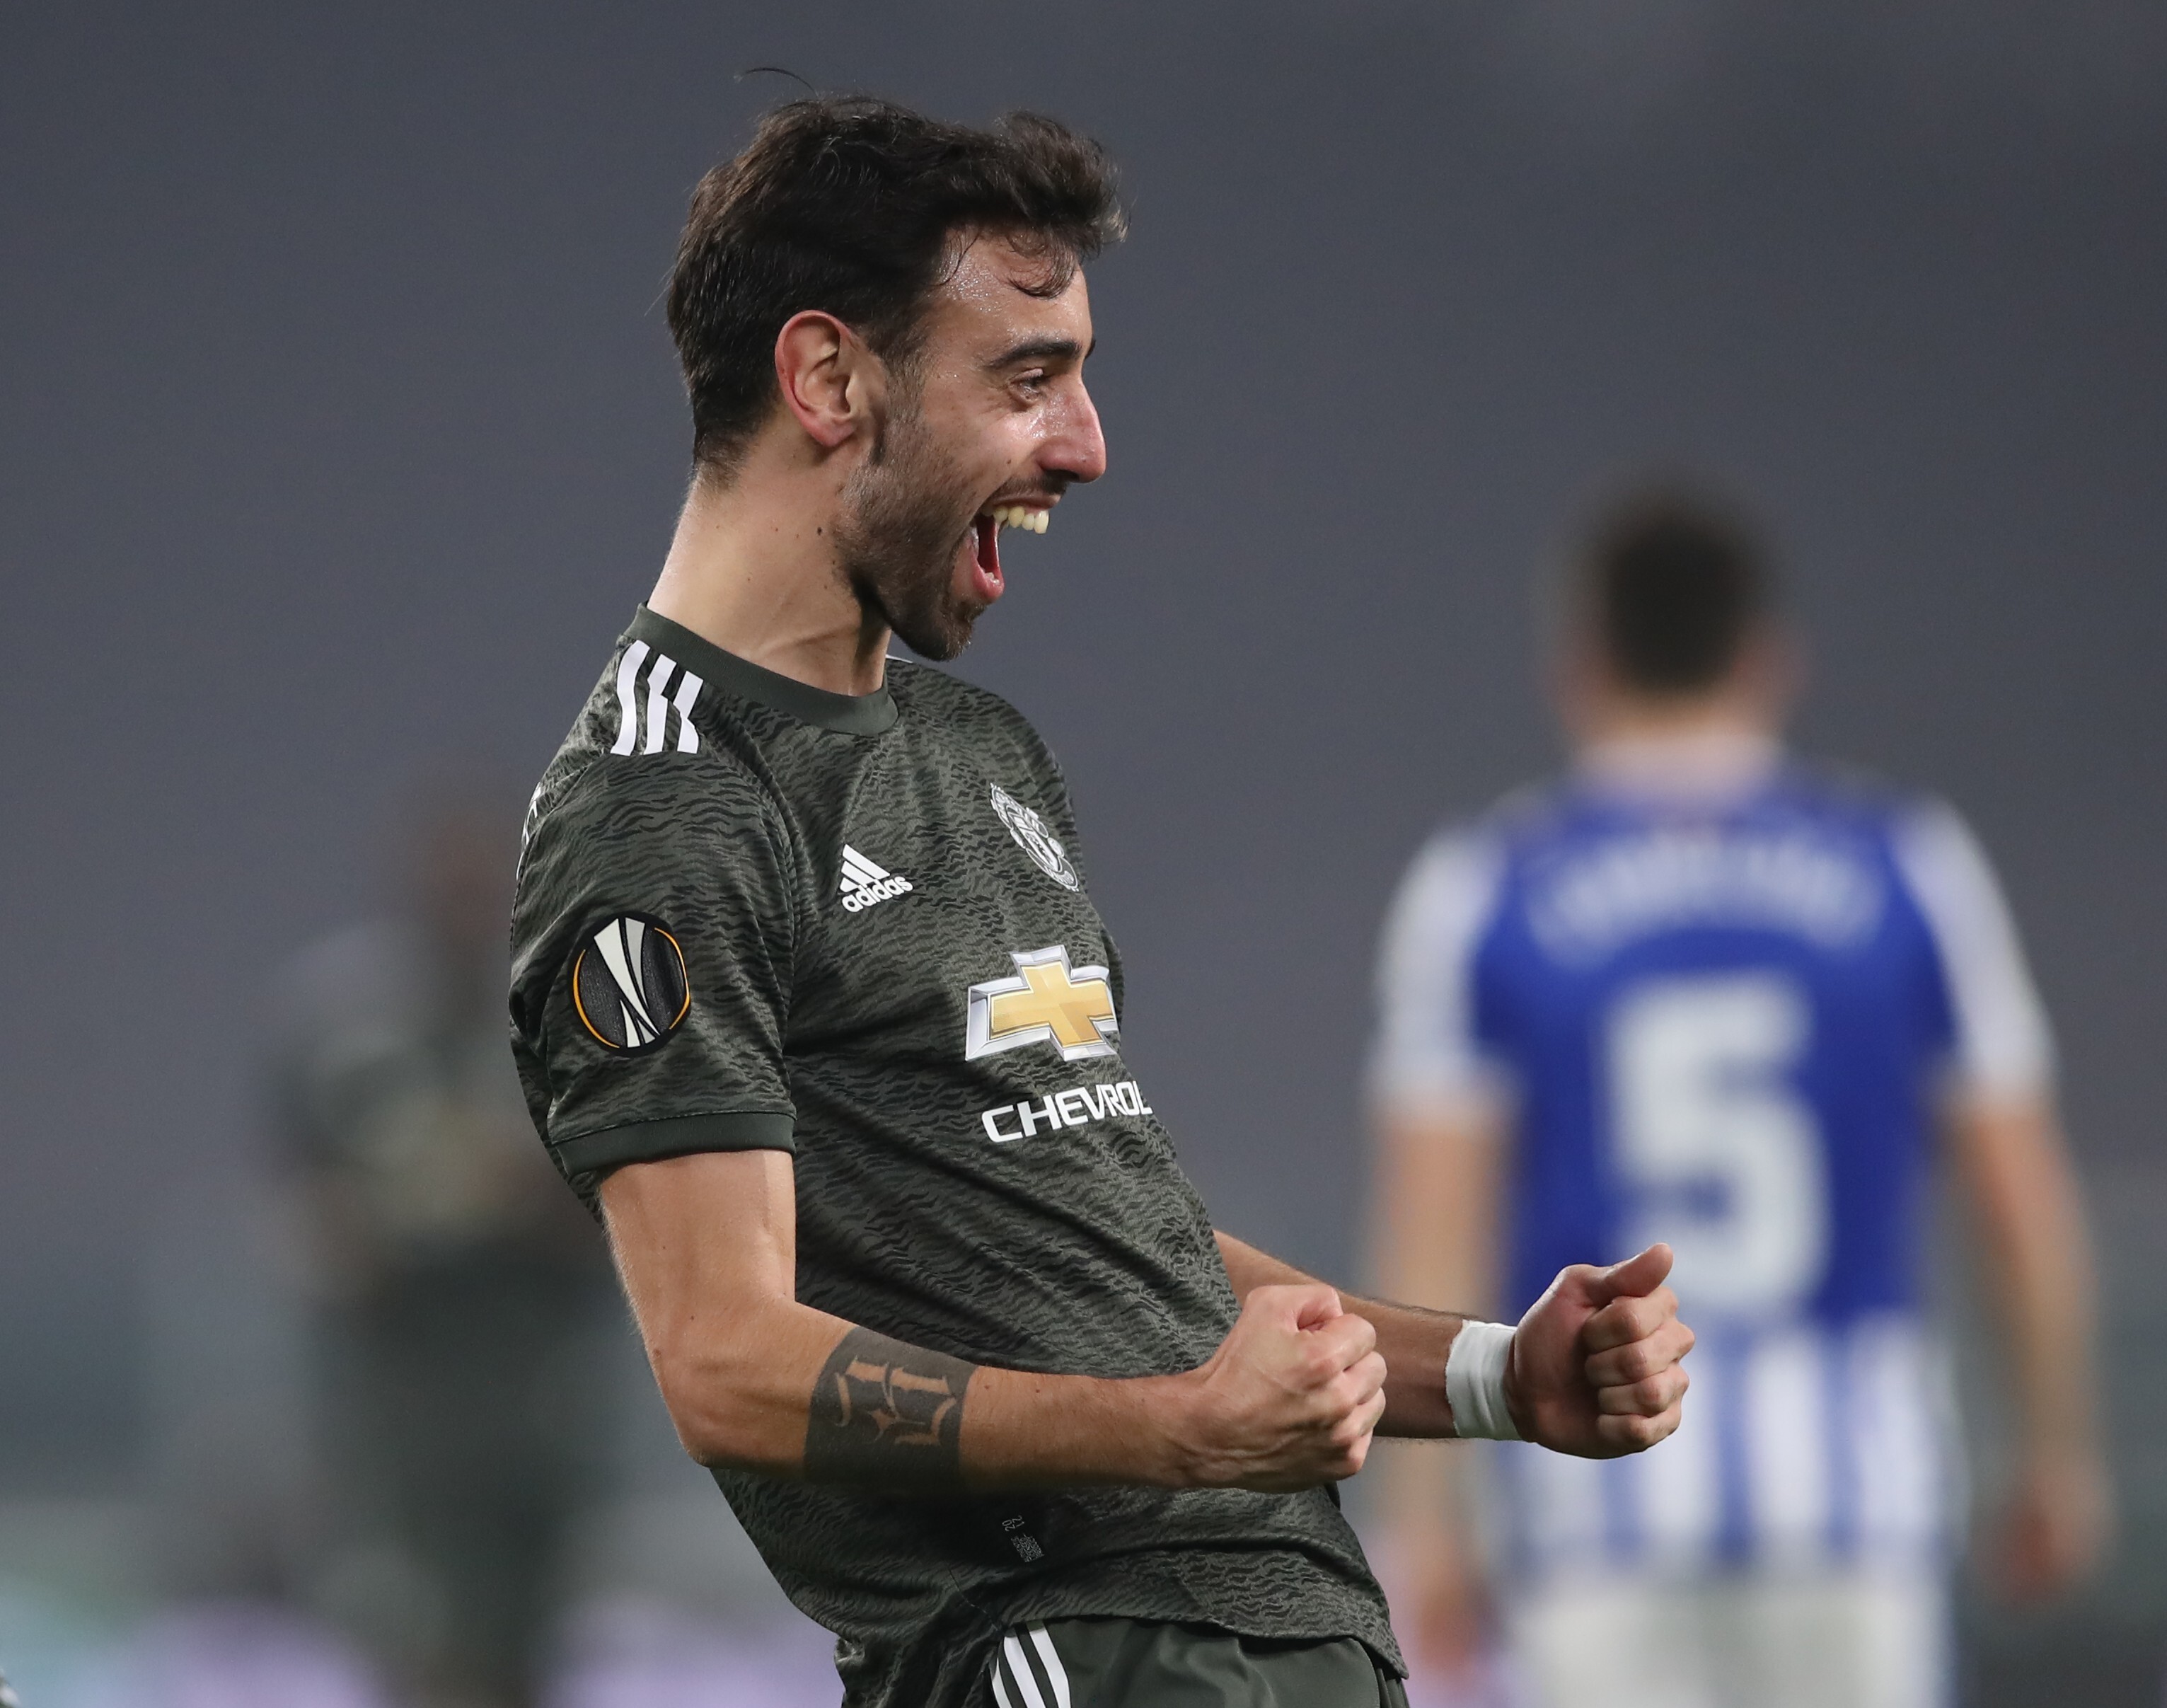 Manchester United’s Bruno Fernandes scores their second goal against Real Sociedad in the Uefa Europa League round of 32 first leg in Turin, Italy. Photo: DPA